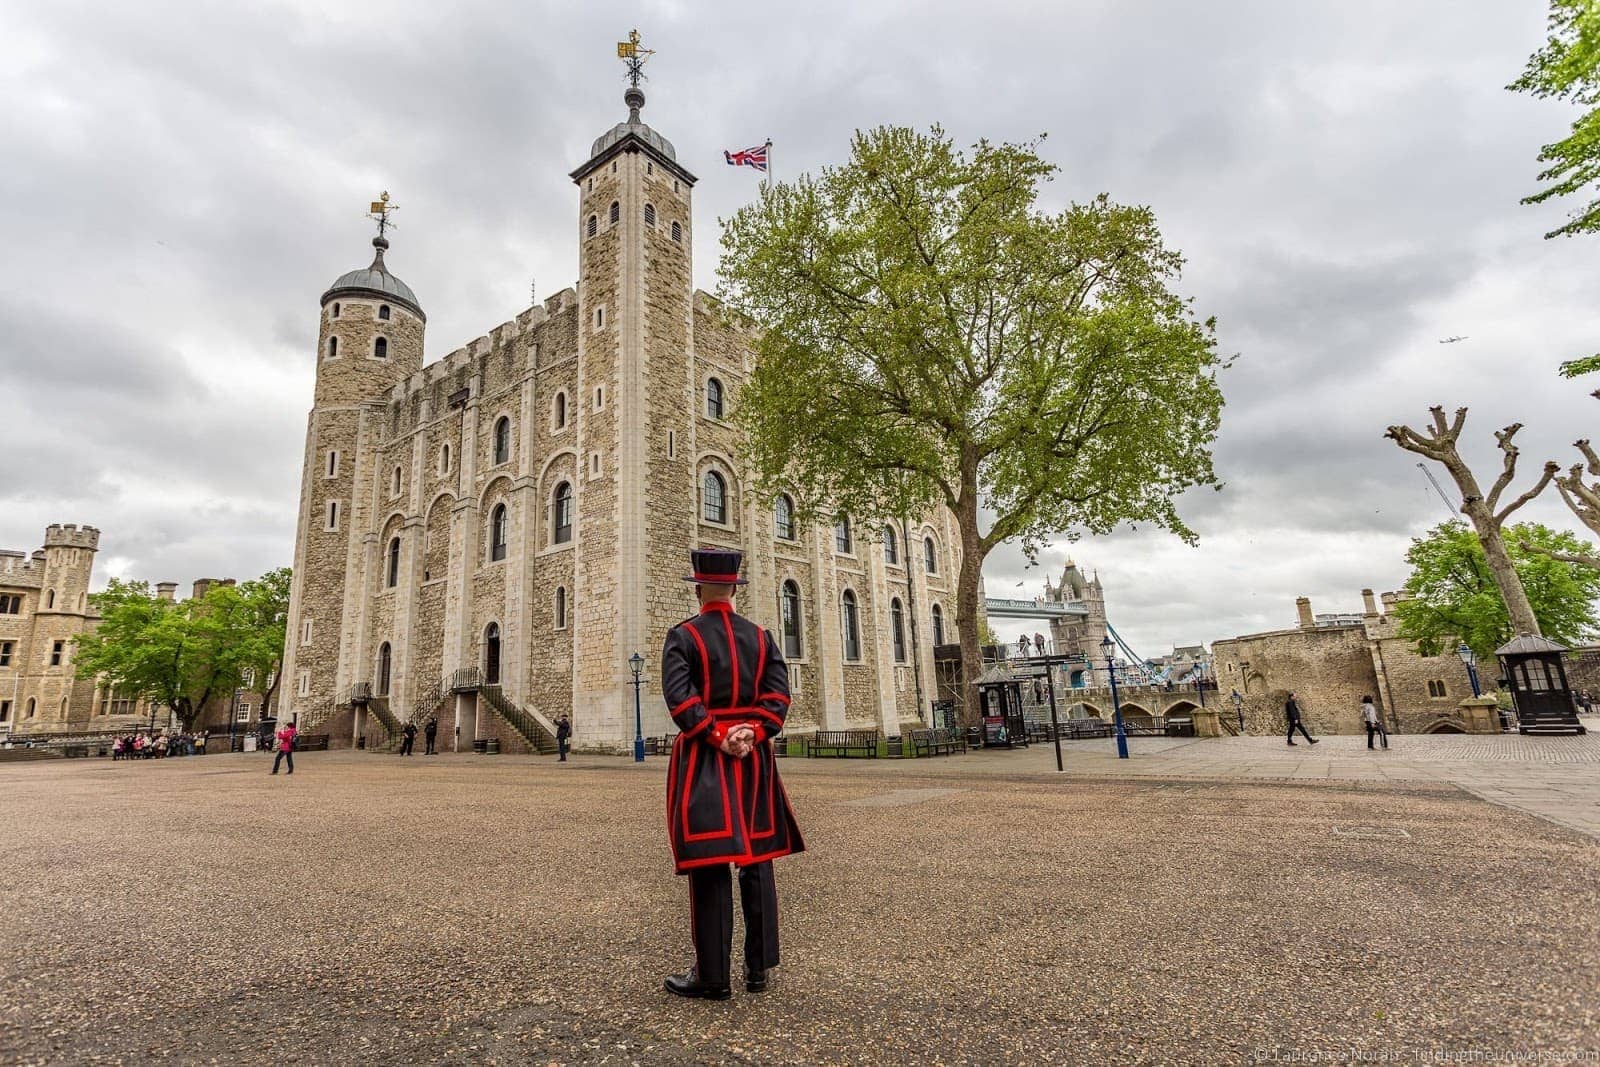 Two Day London Itinerary - White Tower and Beefeater London